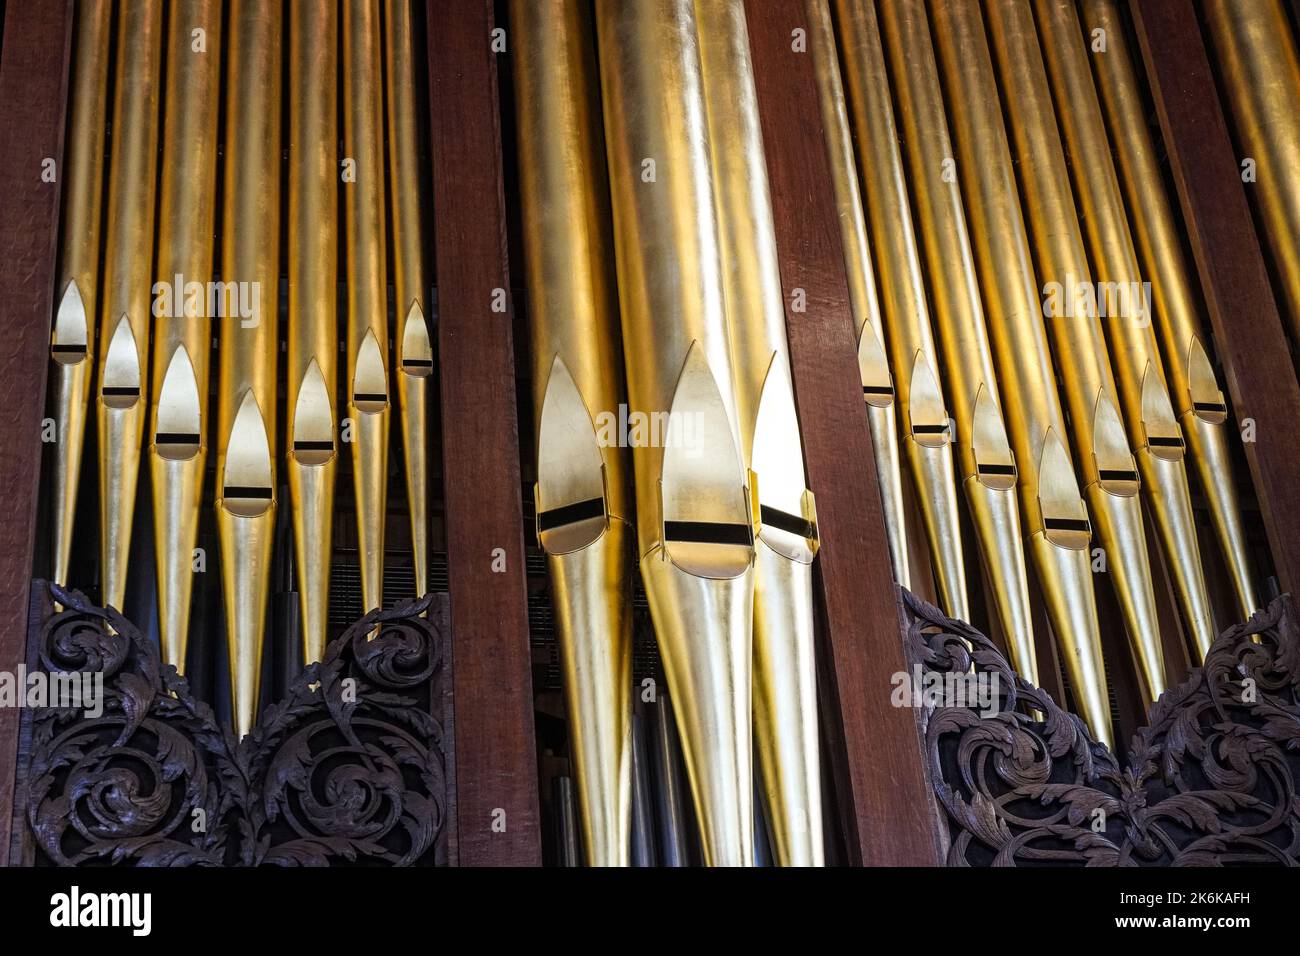 Pipes of the pipe organ inside the chapel Stock Photo